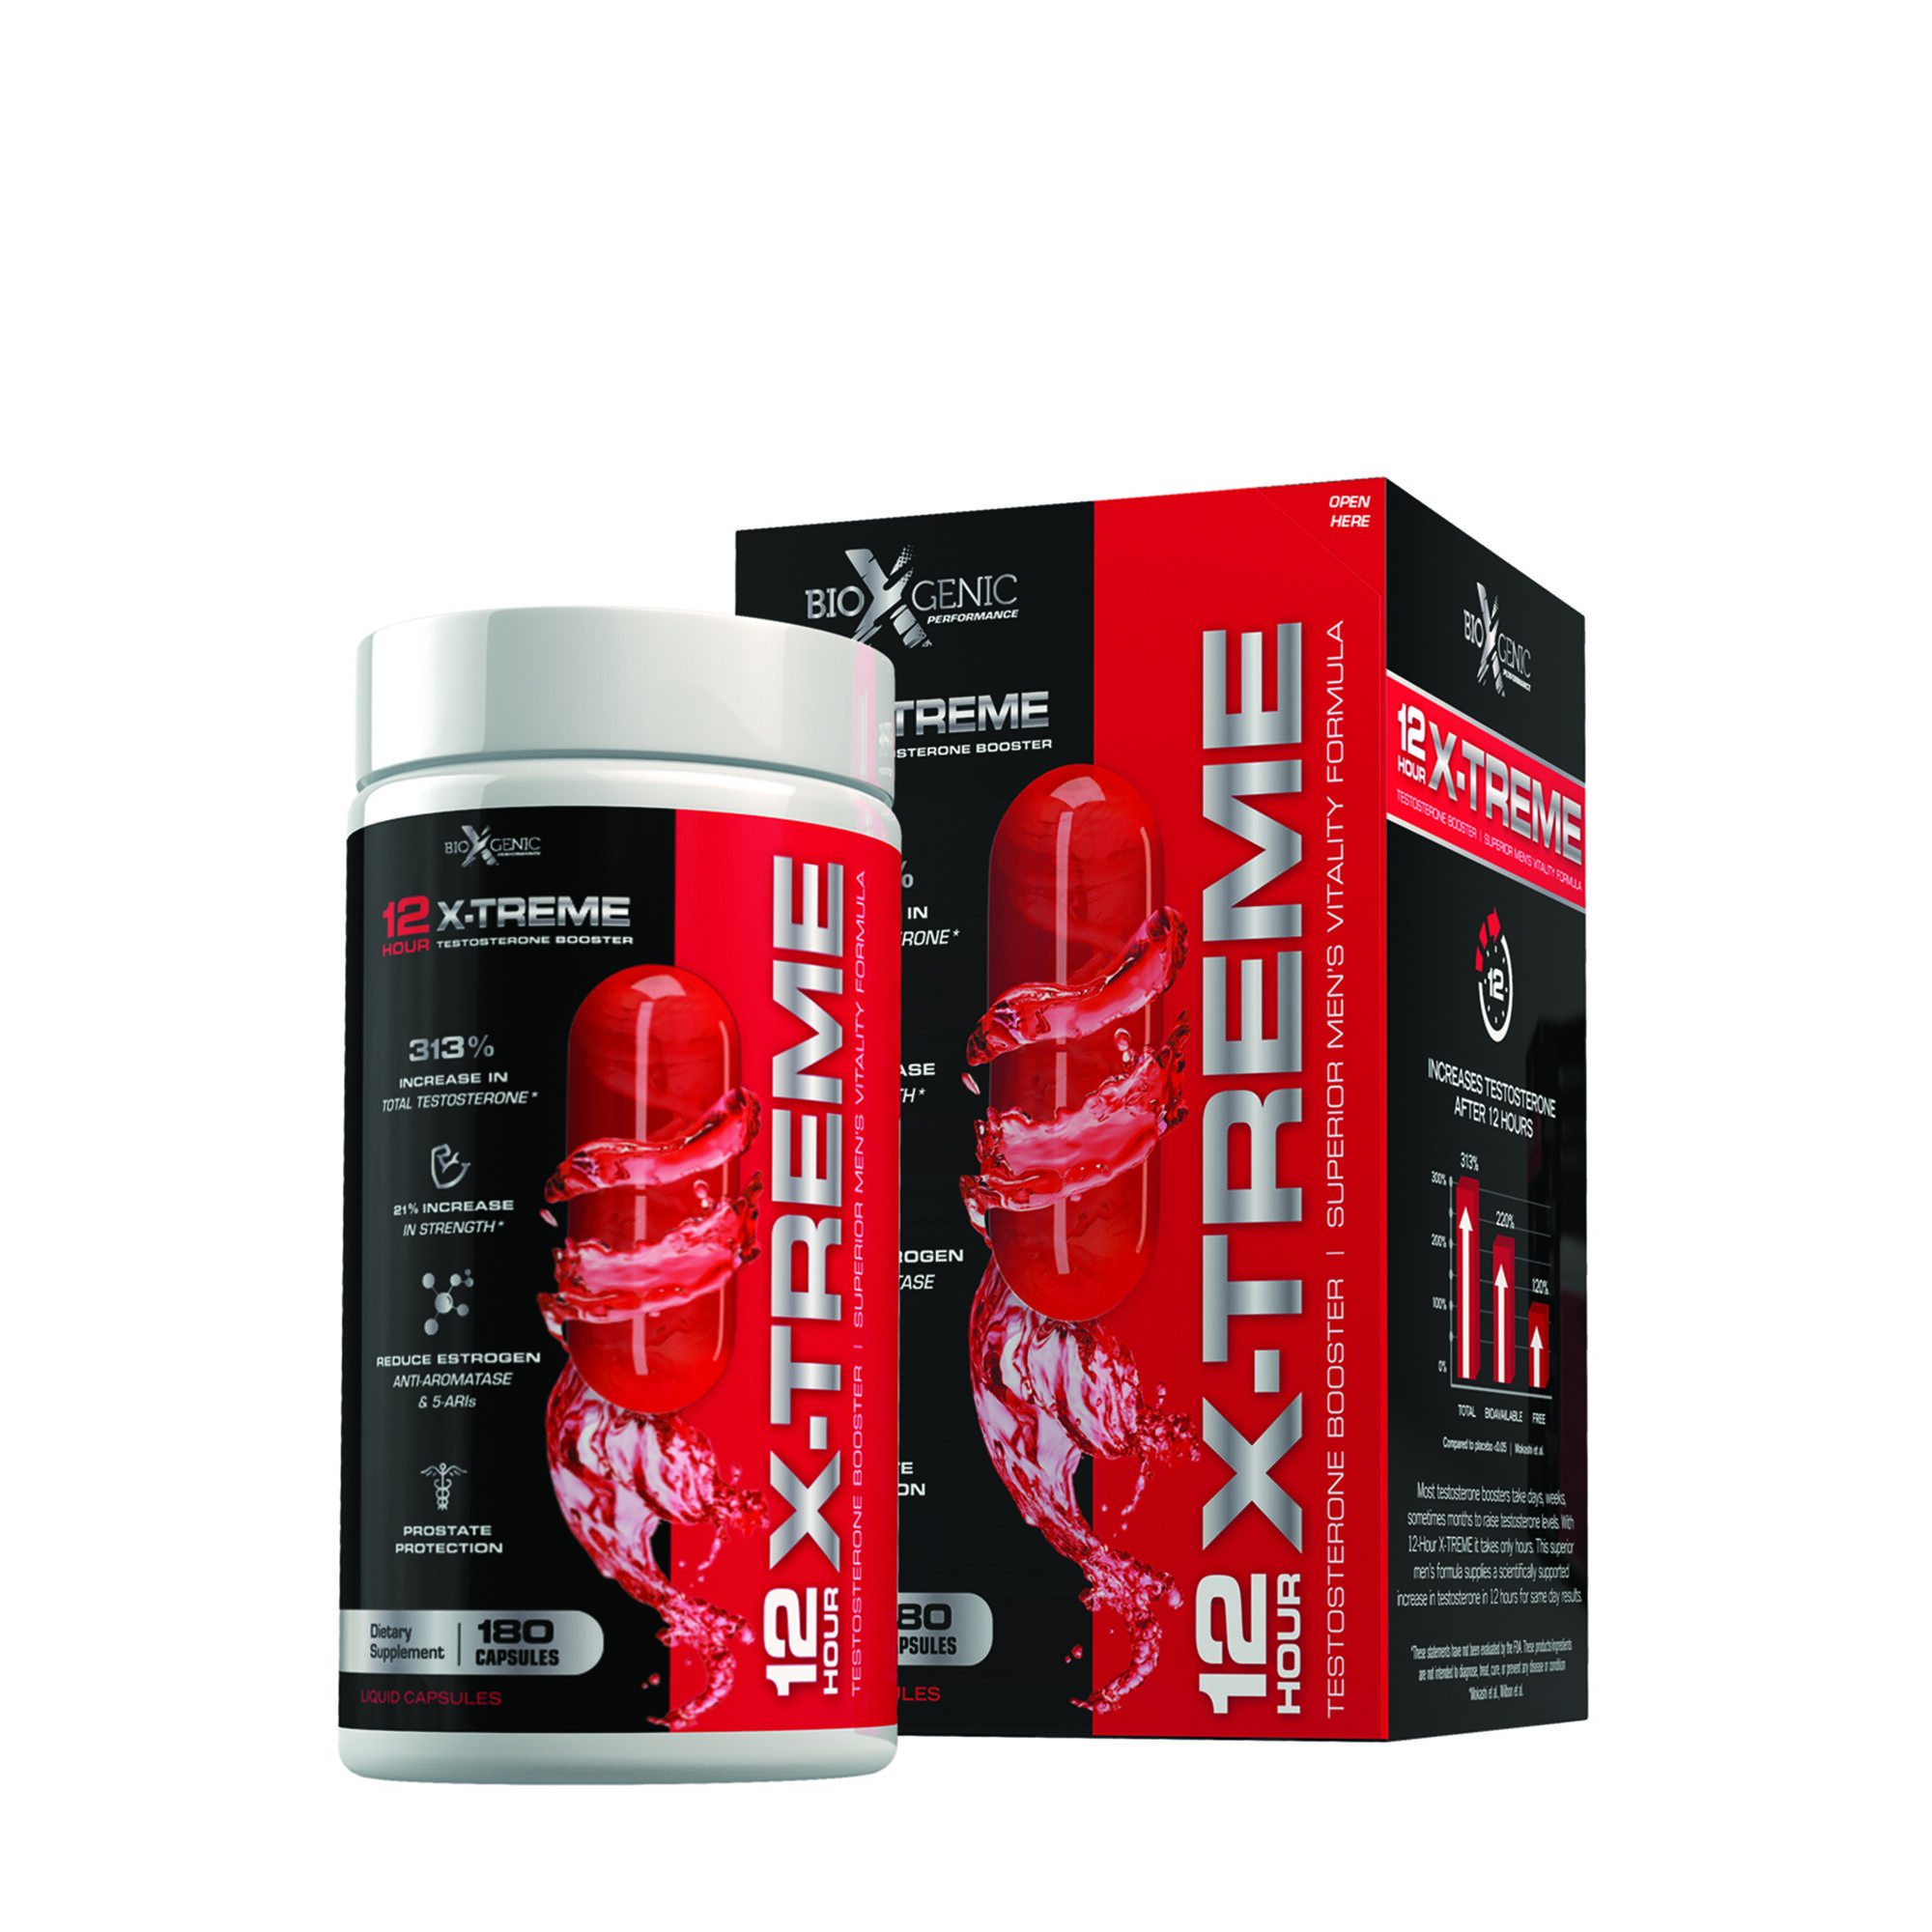 Xtreme Testosterone Booster Reviews